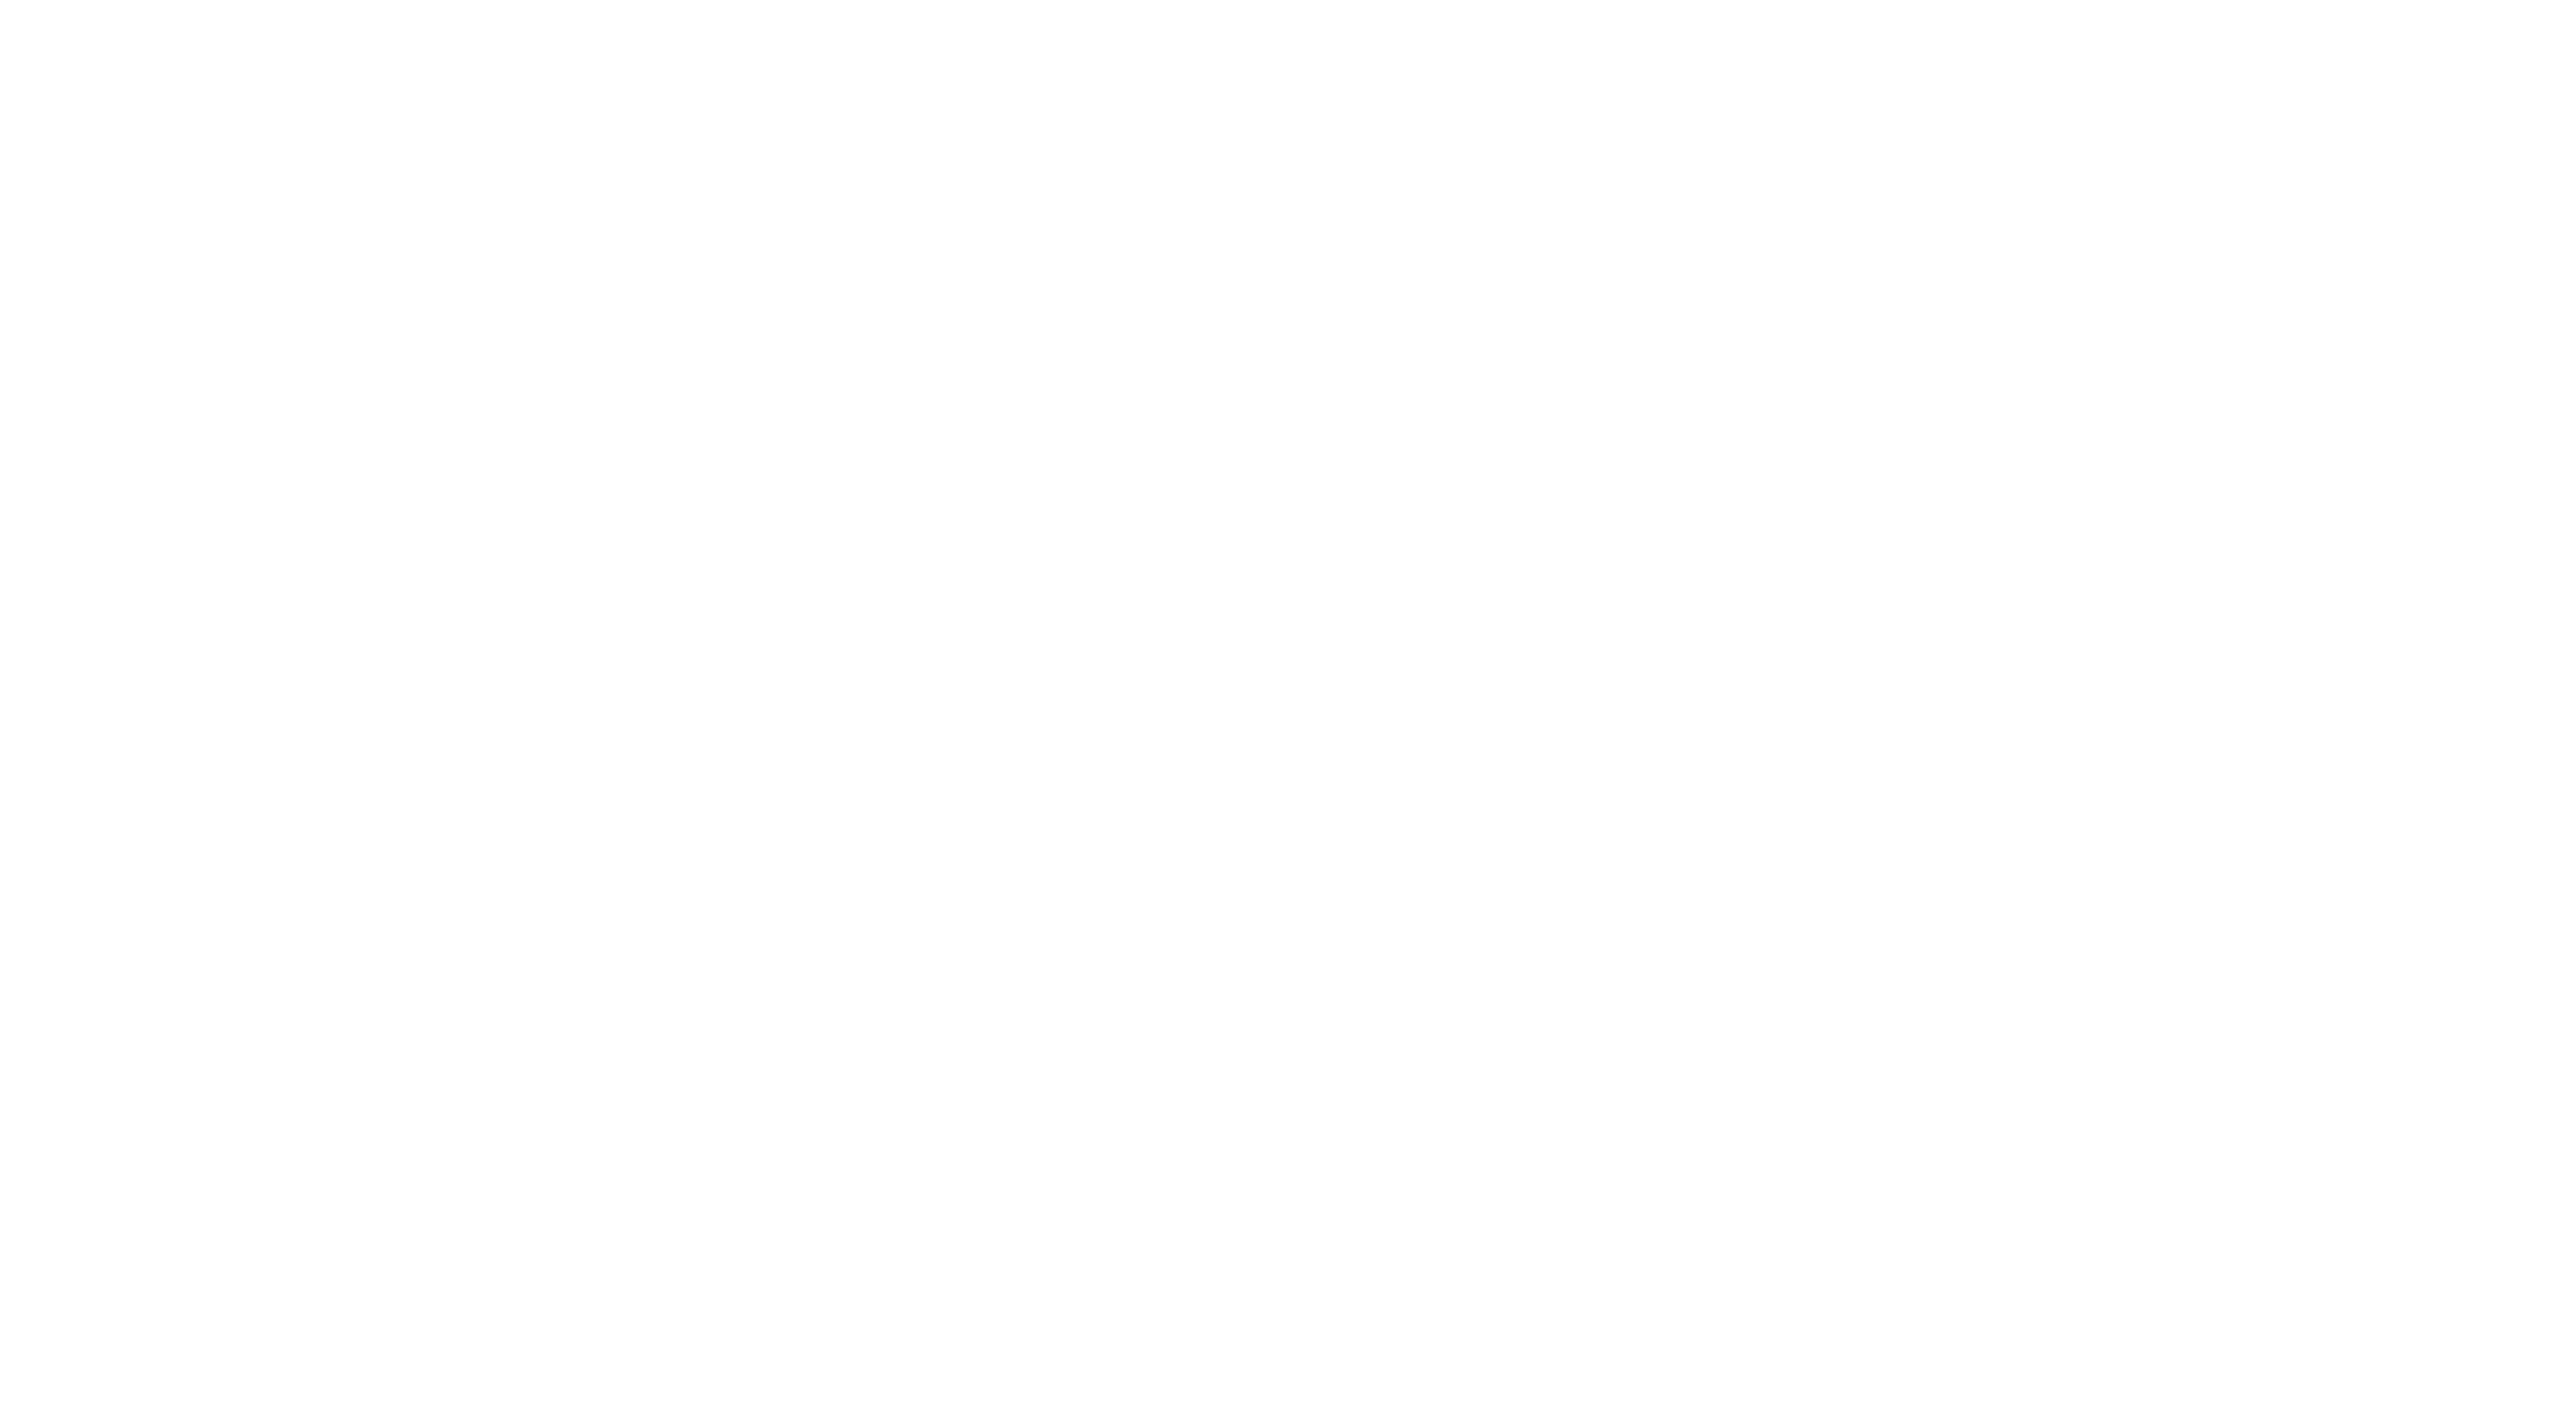 Background pattern of squiggly lines